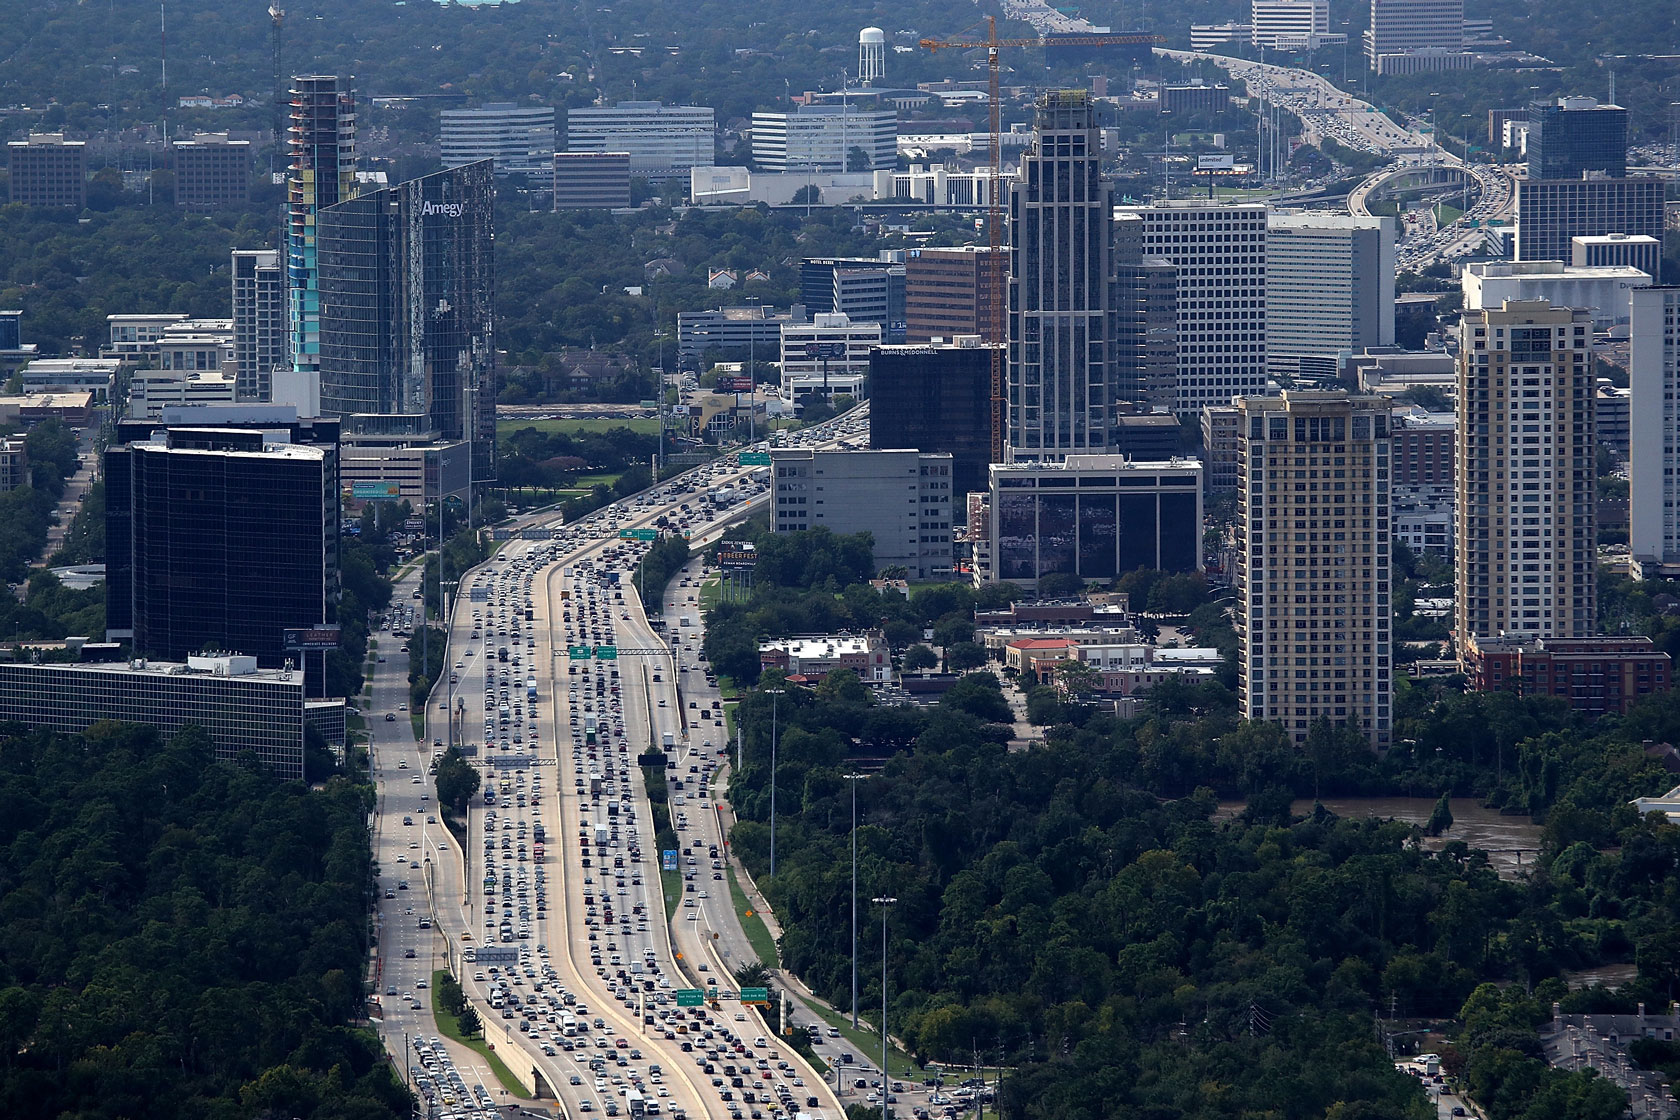 An image of a freeway in Houston, Texas